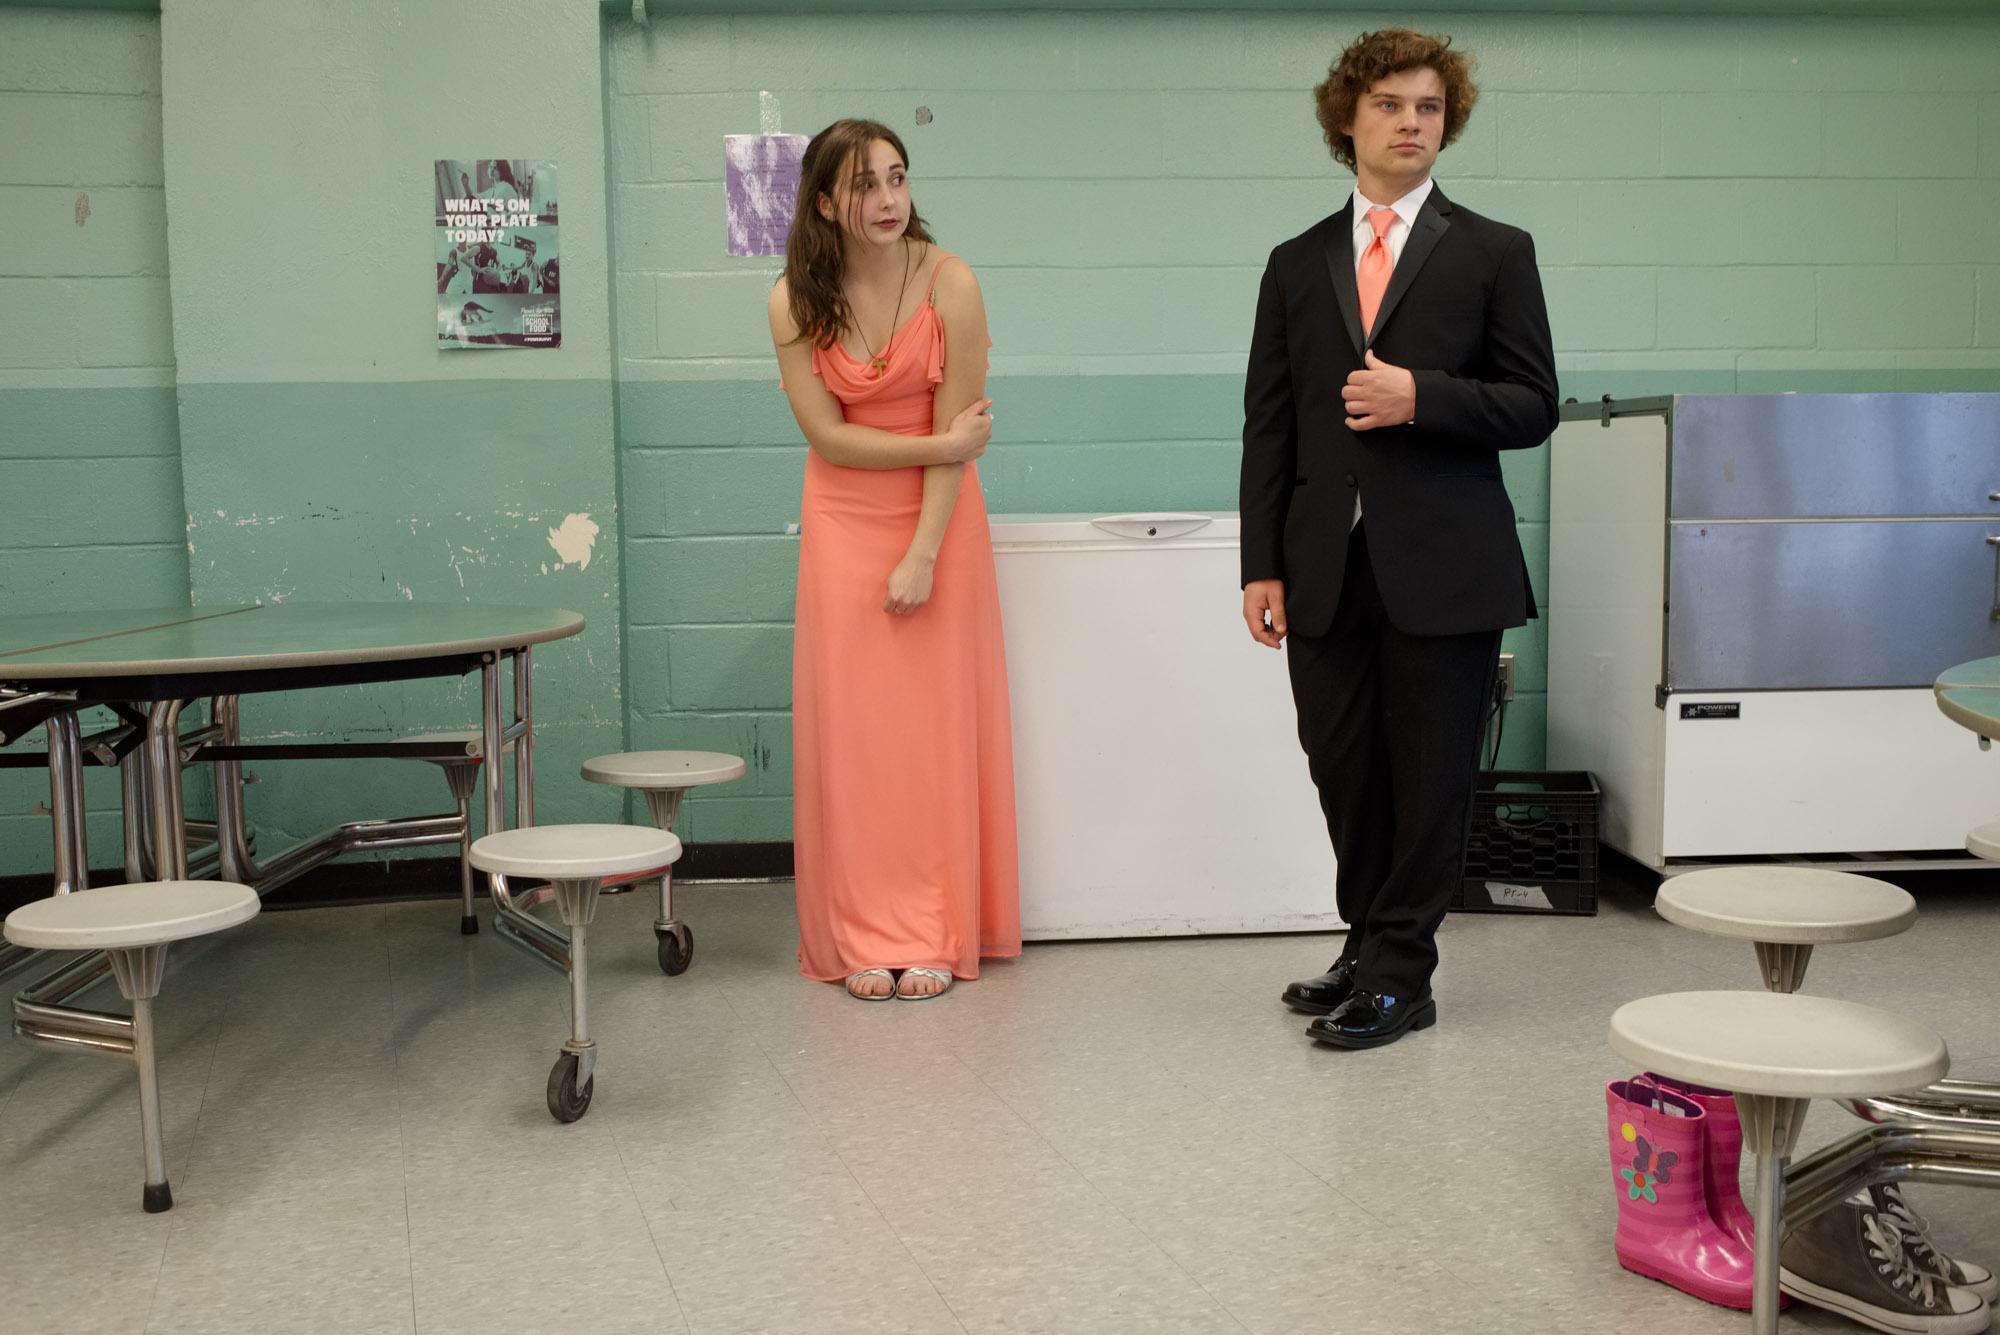 Farewell, With Elegance - Ashley and her dance escort Connor in the cafeteria of...